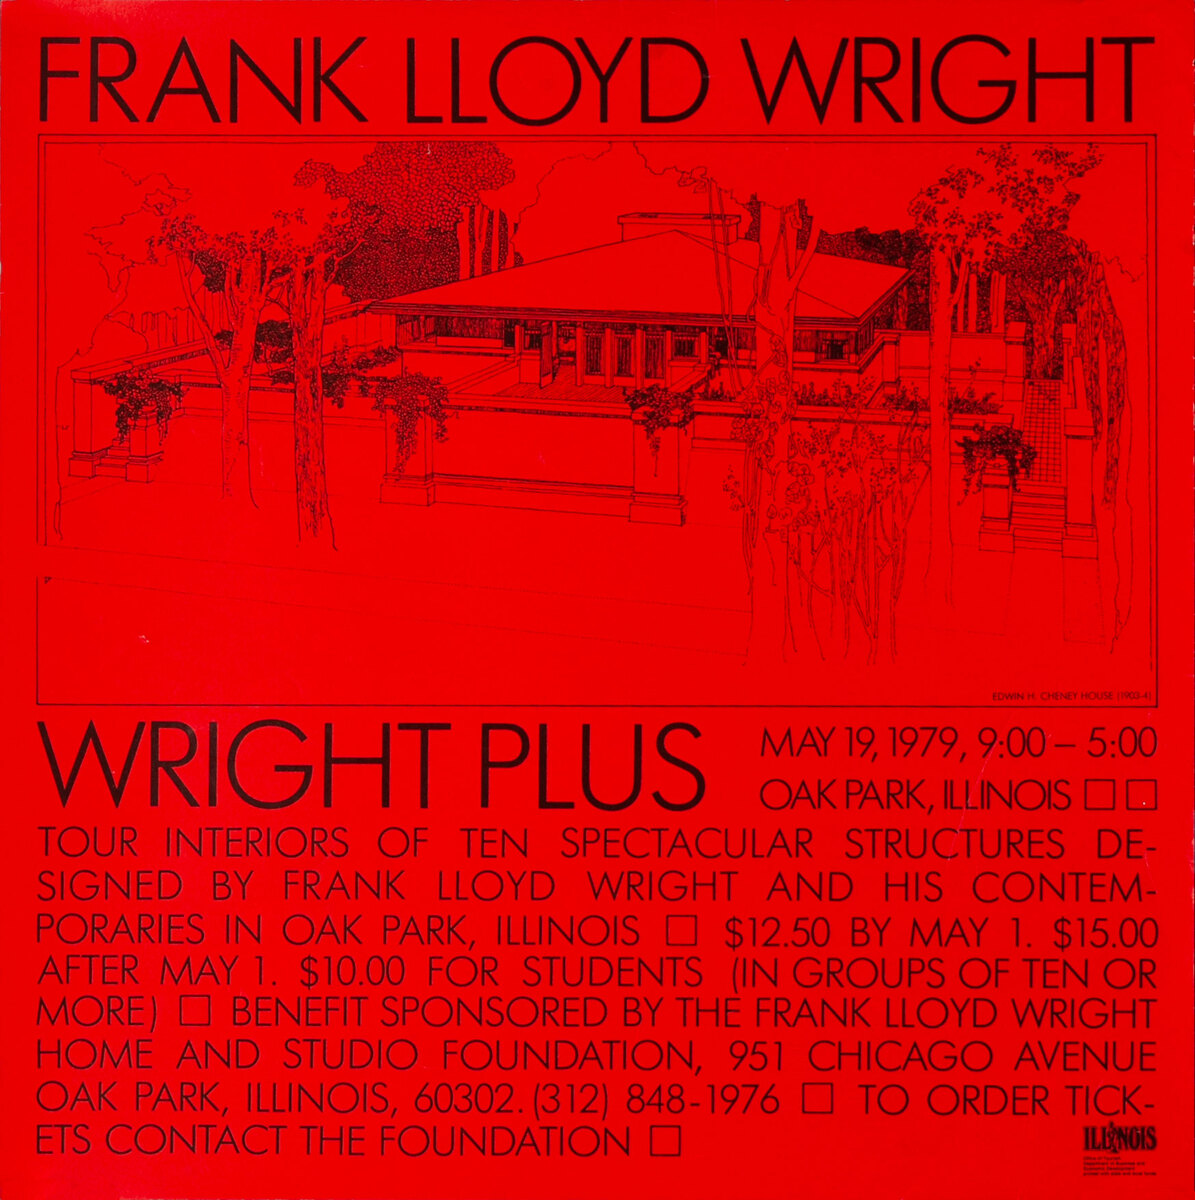 The Frank Lloyd Wright Home and Studio Foundation Poster -  Wright Plus